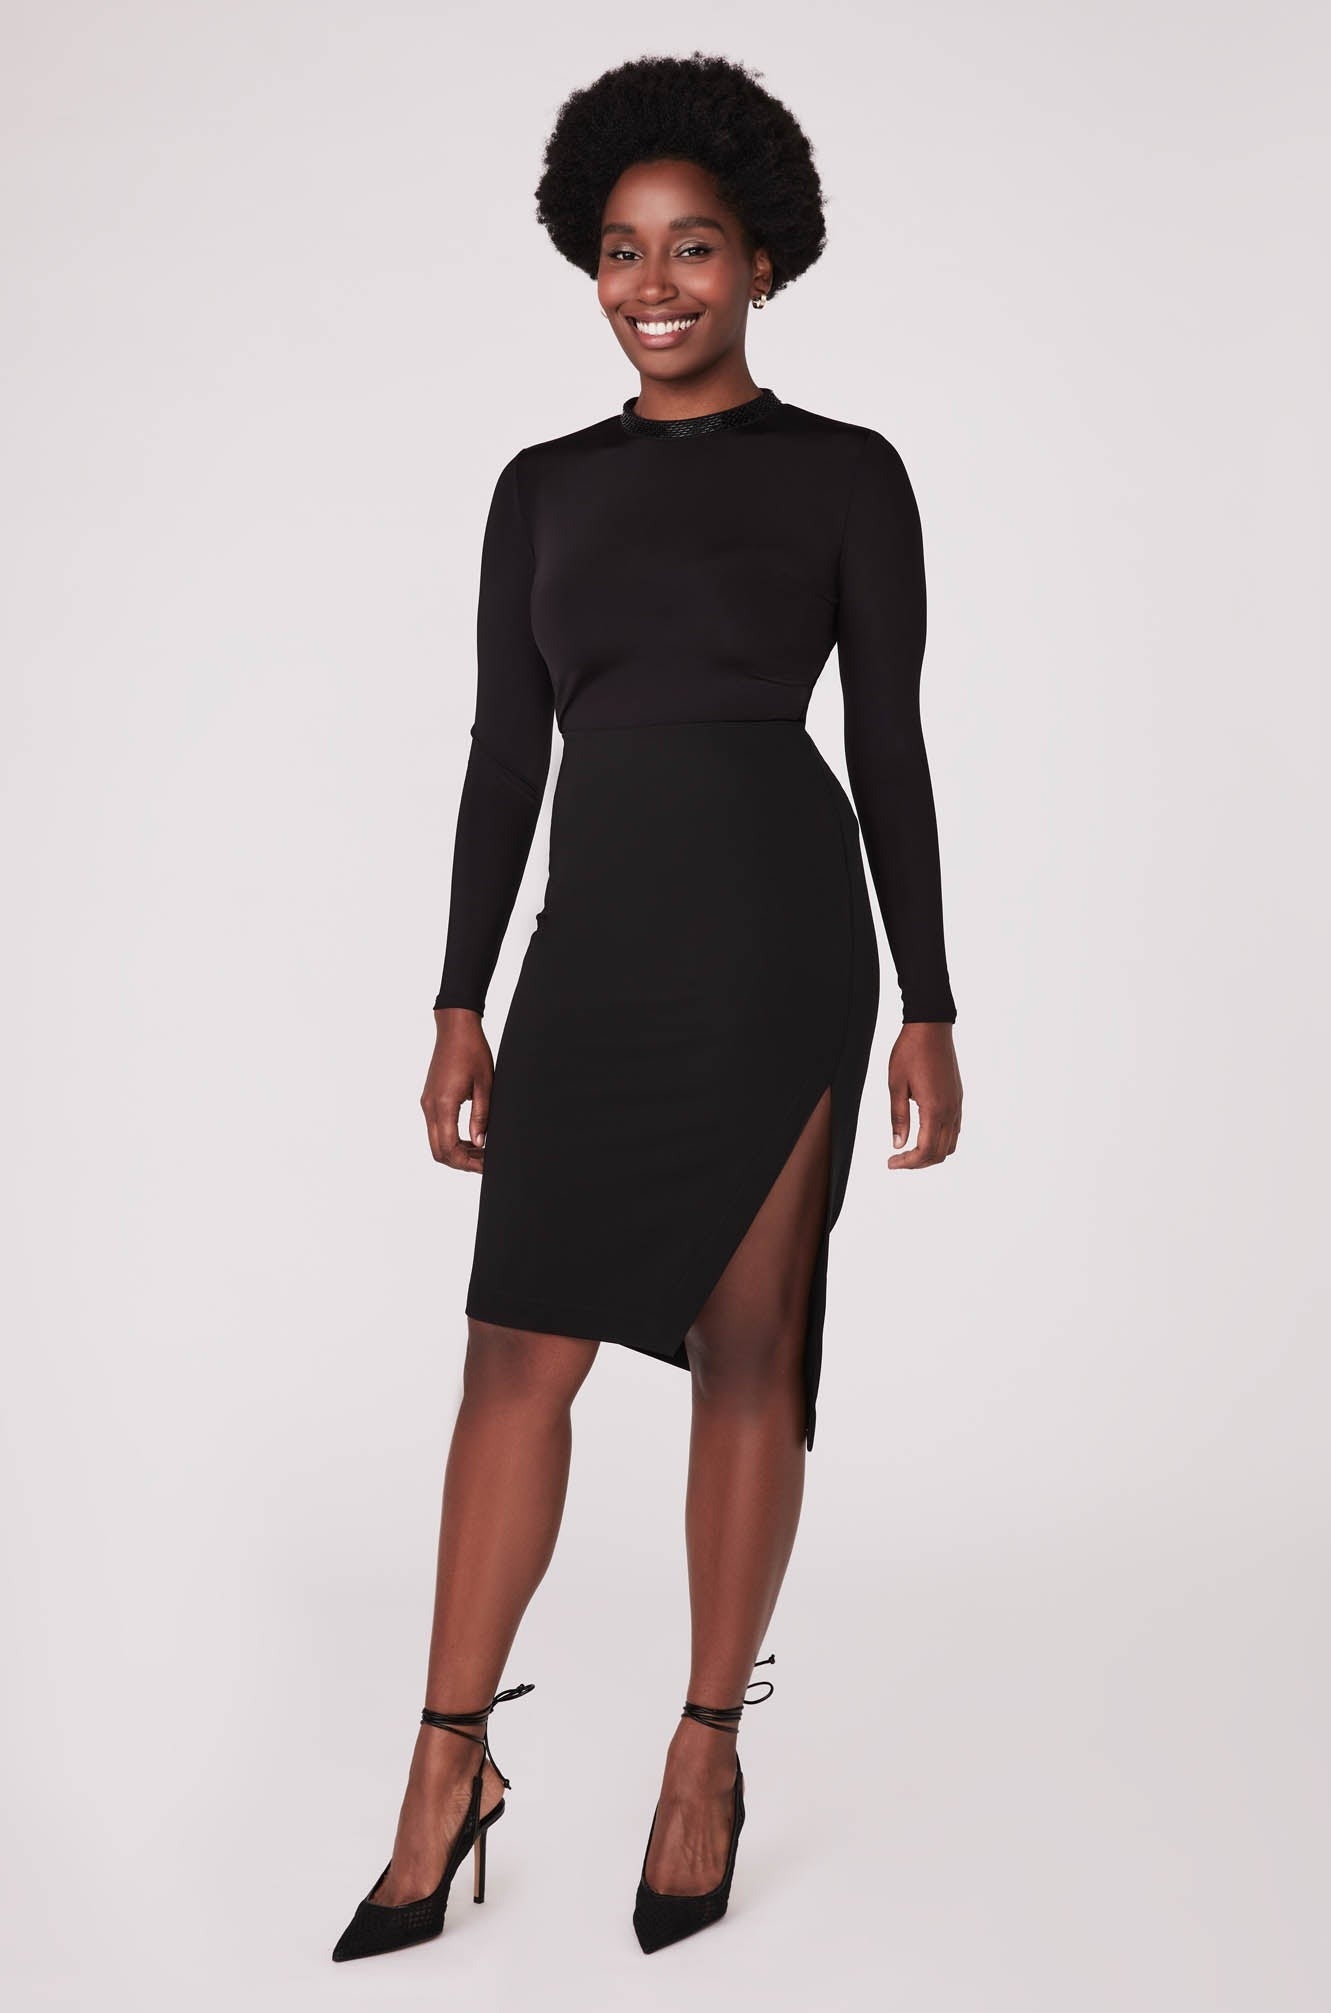 Front view of a woman wearing a high waisted black asymmetrical pencil skirt with cut out by Miriam Baker.